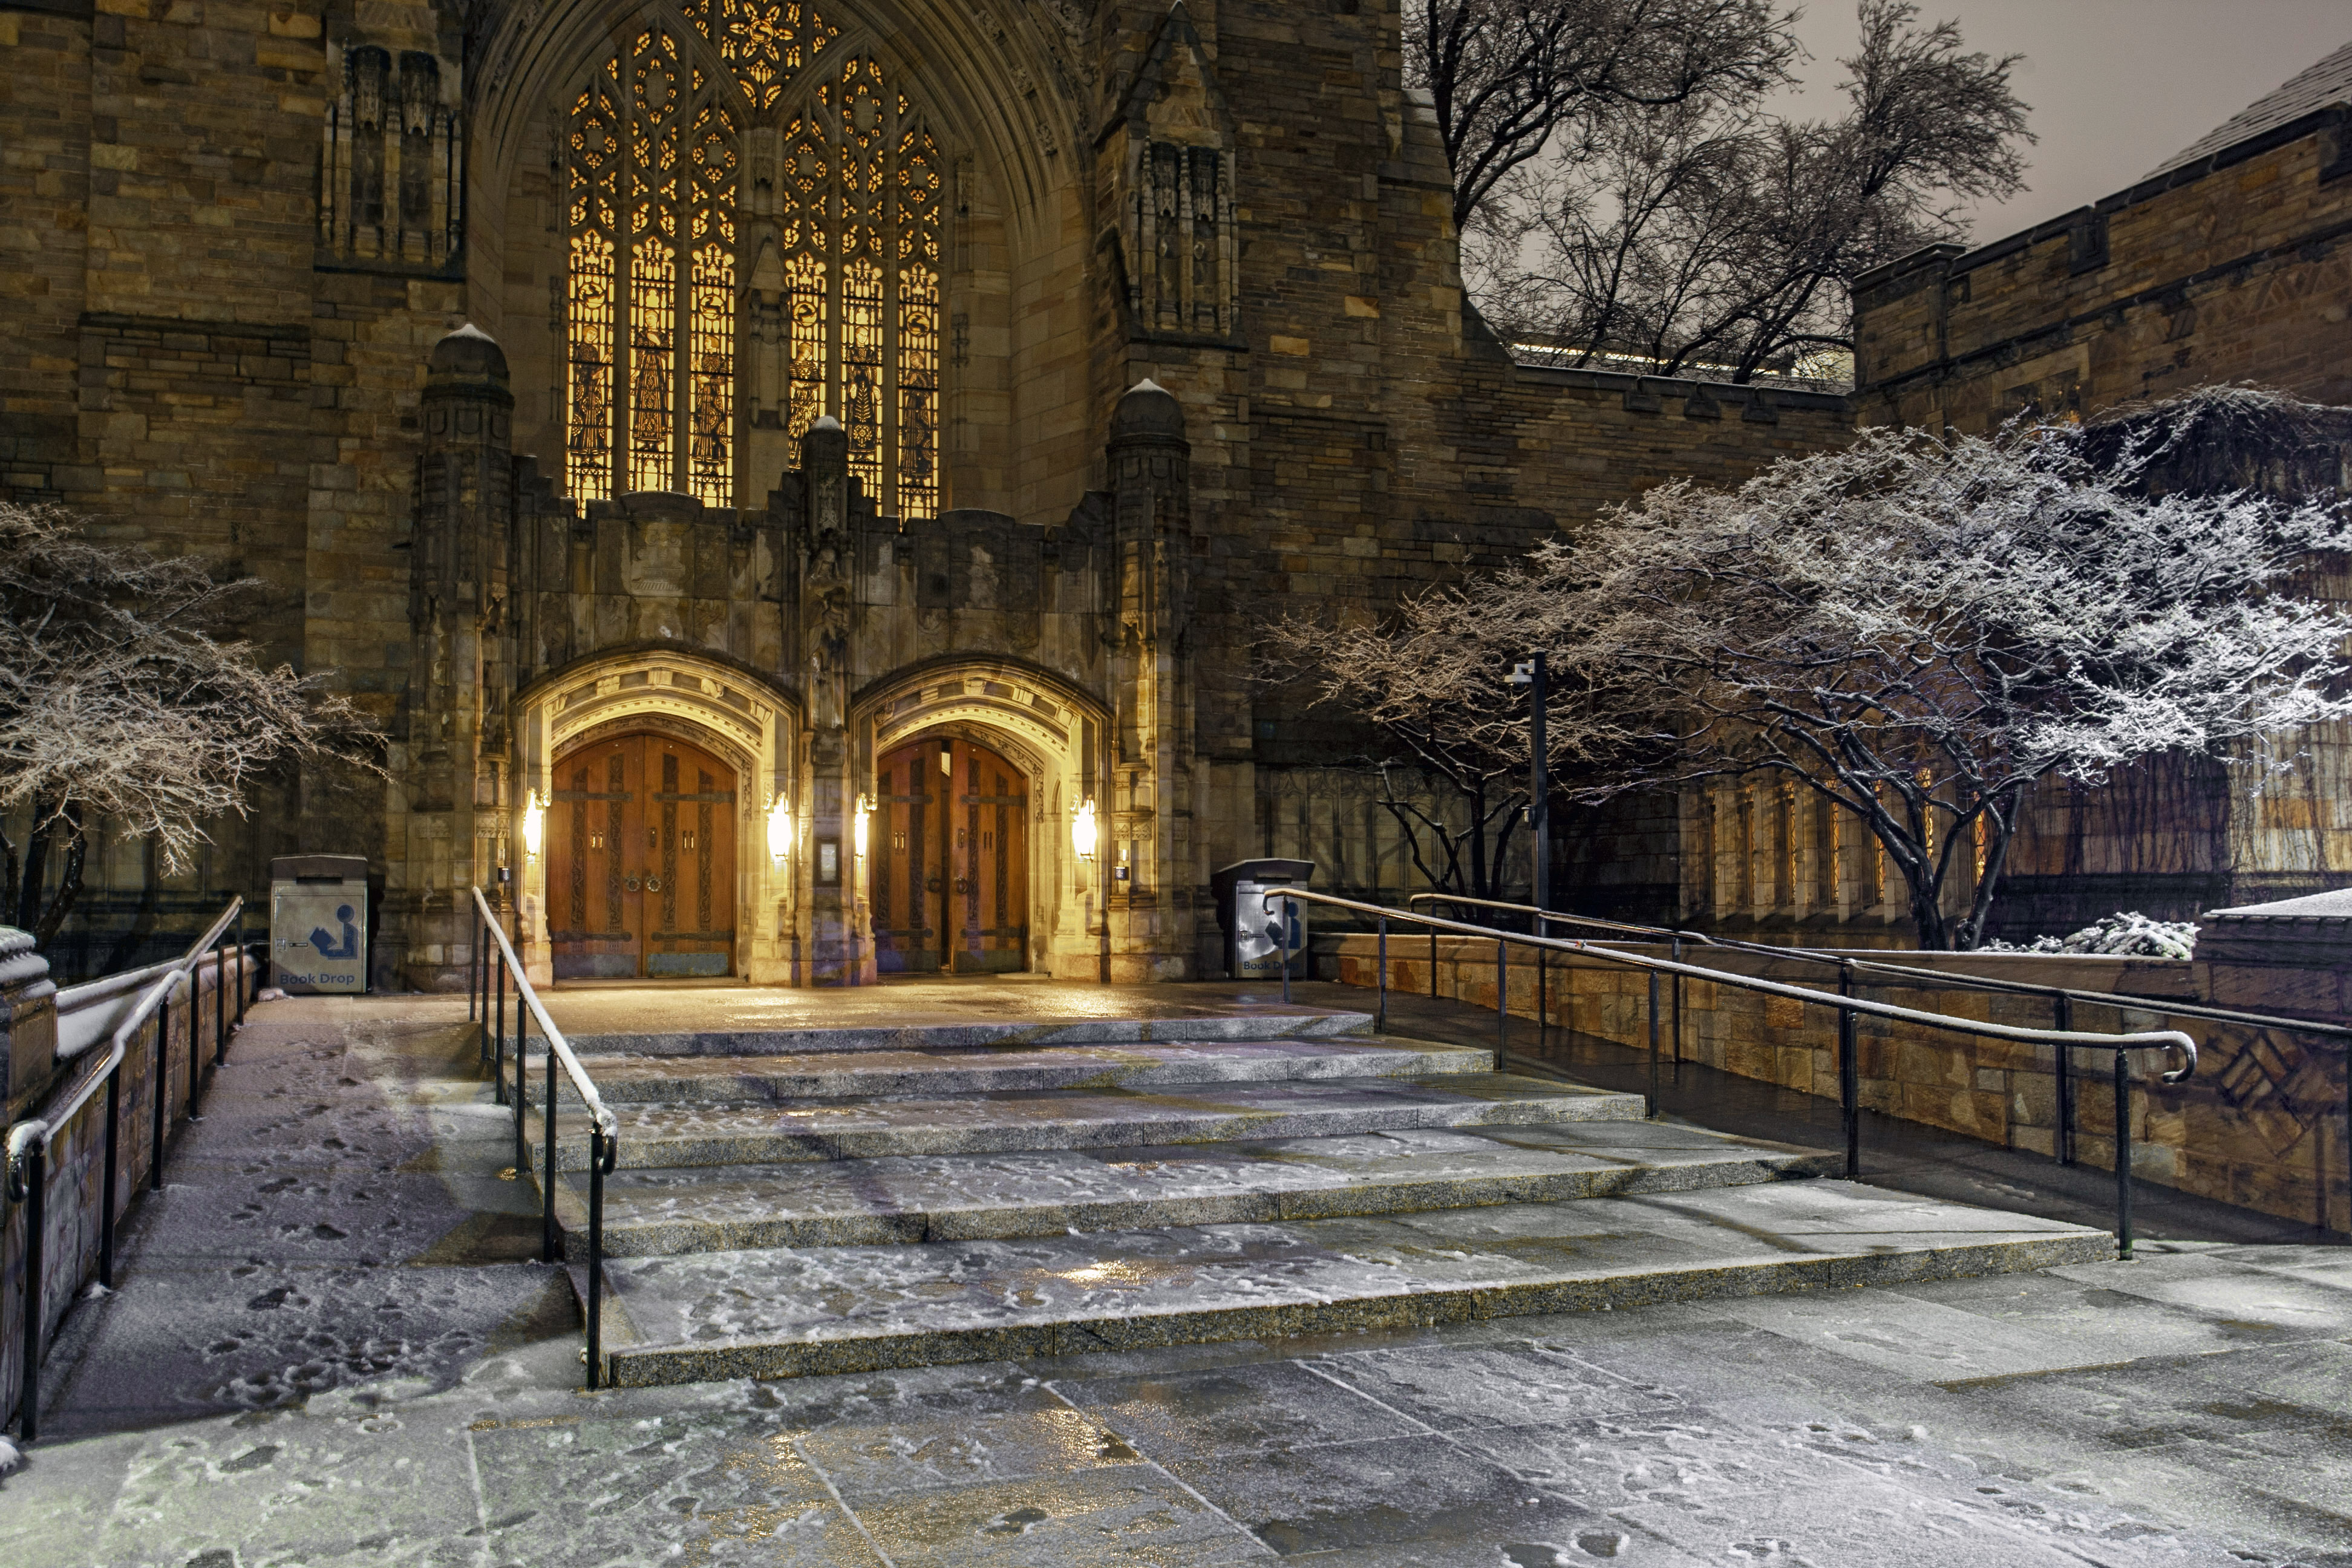 nighttime scene of library entrance with light over arched doors and through stained glass windows and light snow on the ground